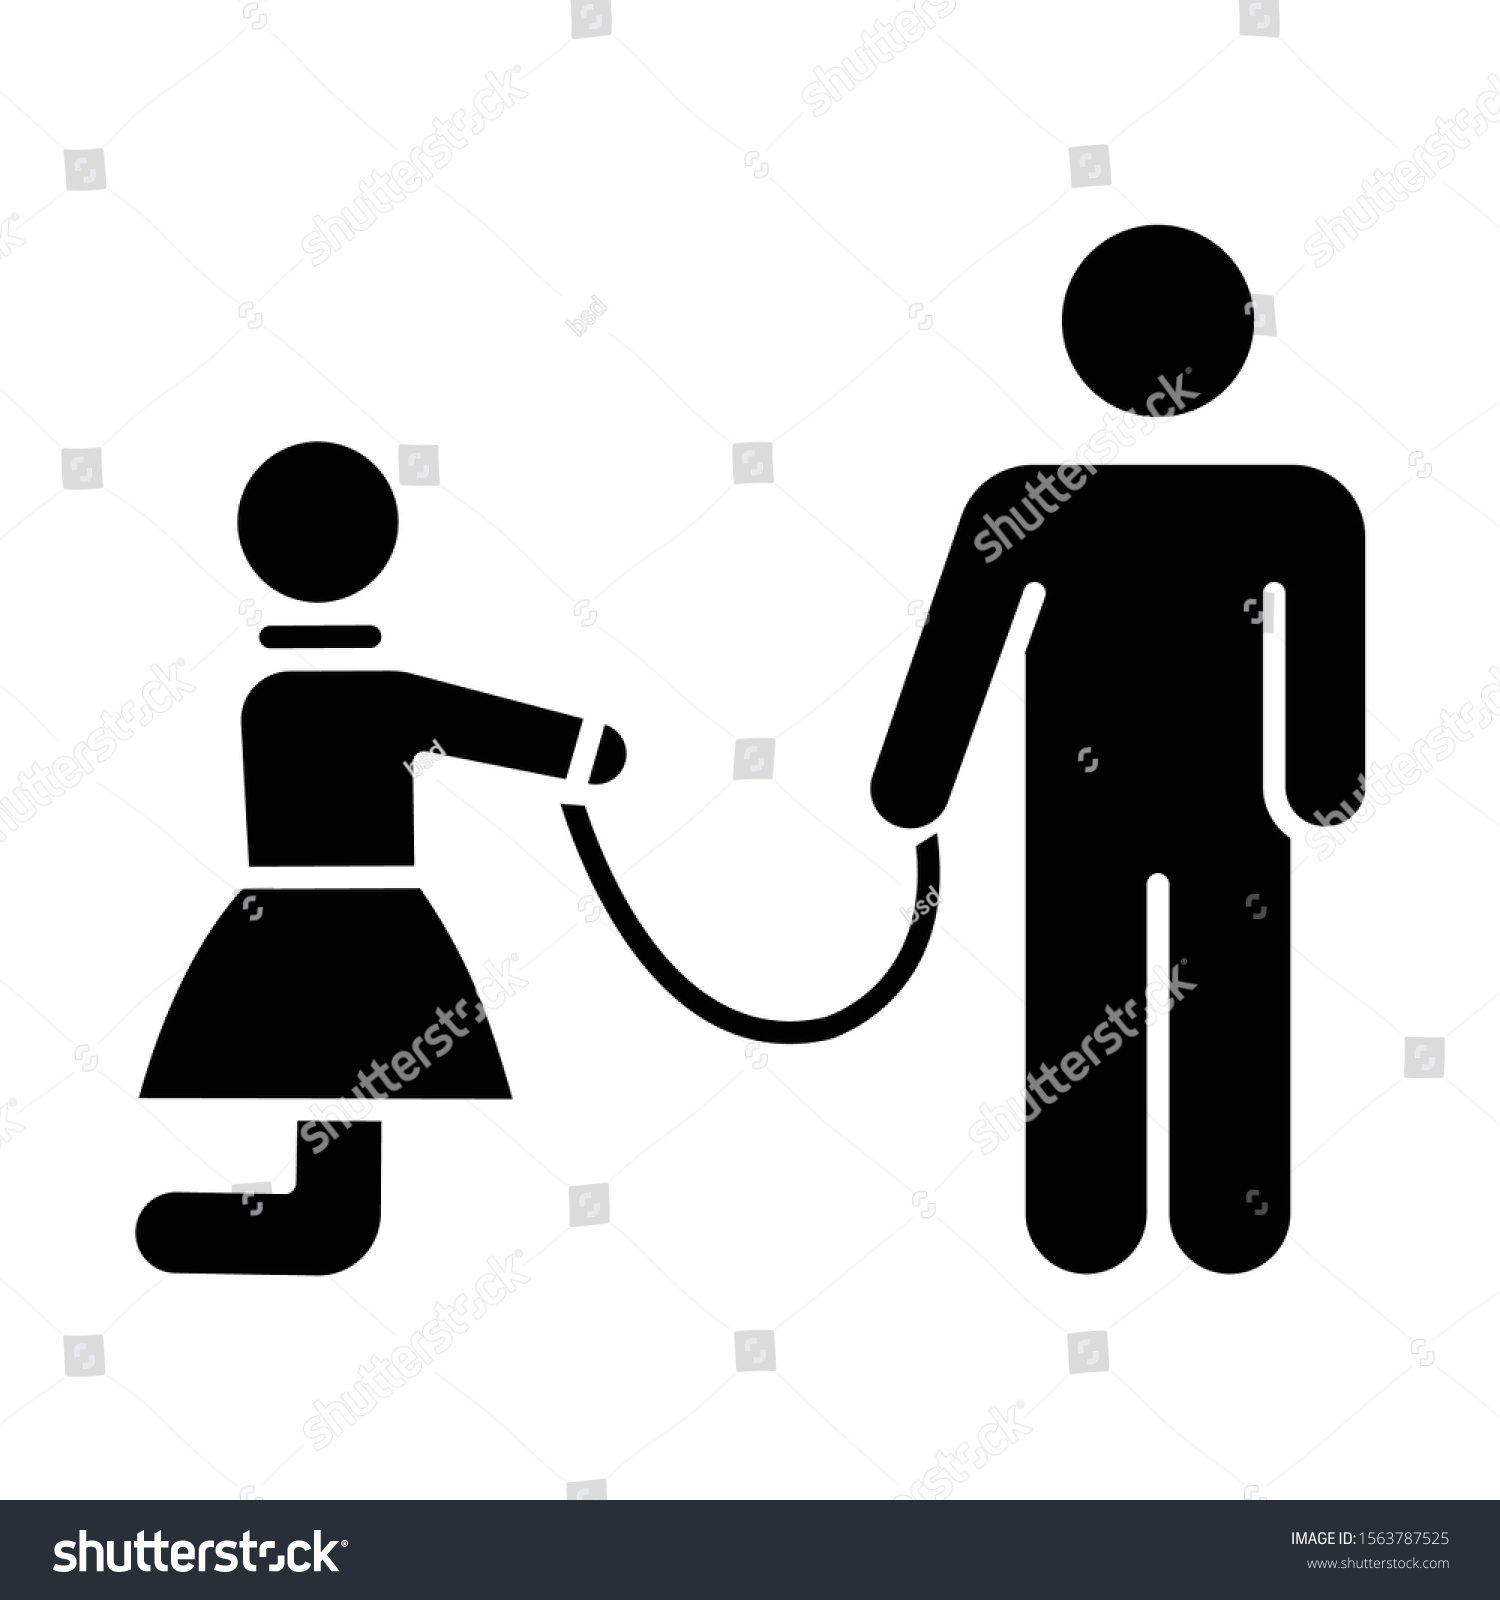 Sexual Slavery Glyph Icon Violation Female Stock Vector Royalty Free 1563787525 Shutterstock